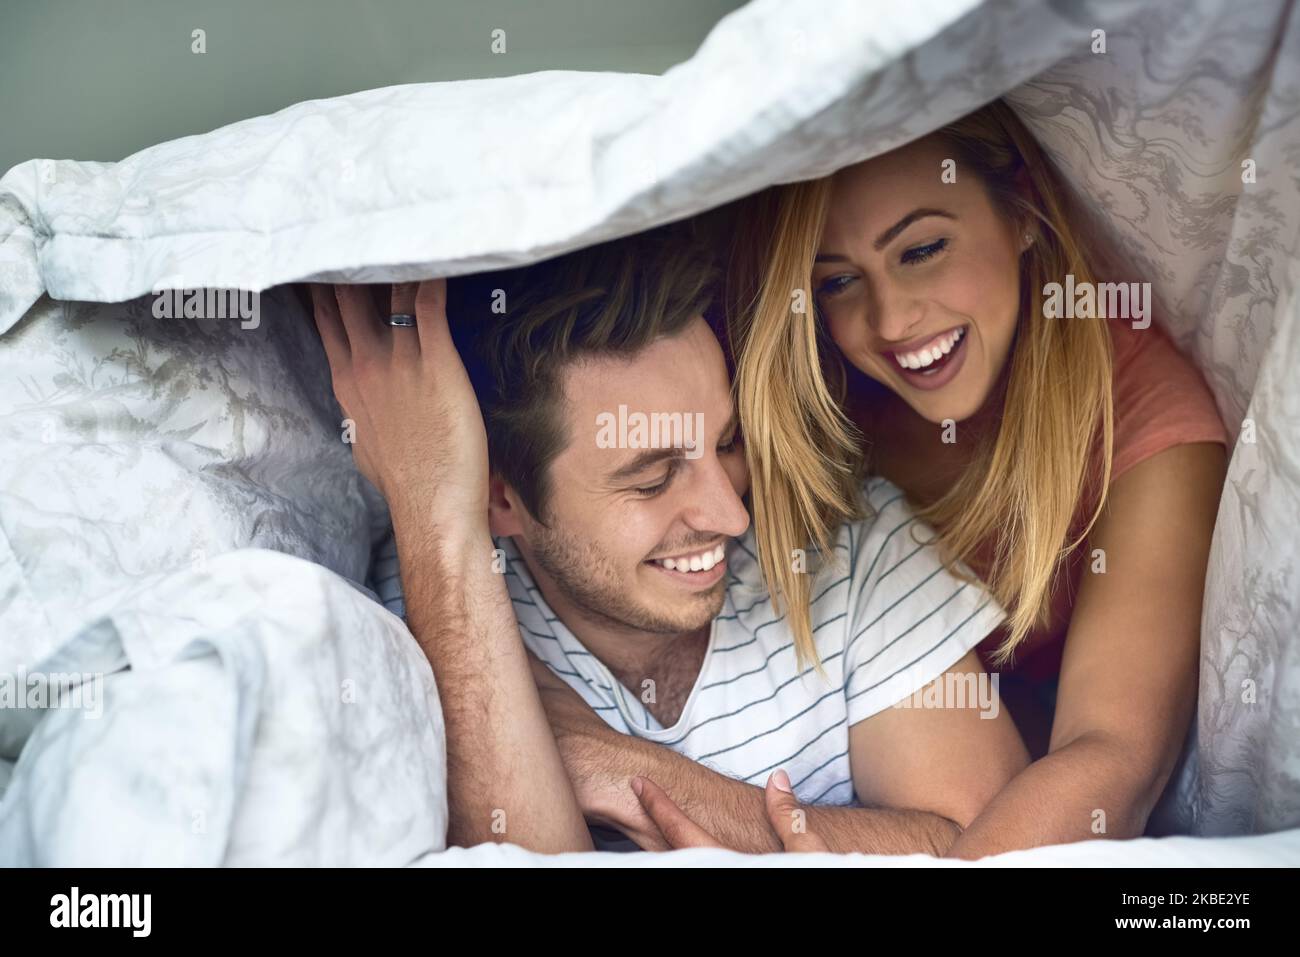 Delightfully in love. a happy young couple having fun under a duvet in bed. Stock Photo